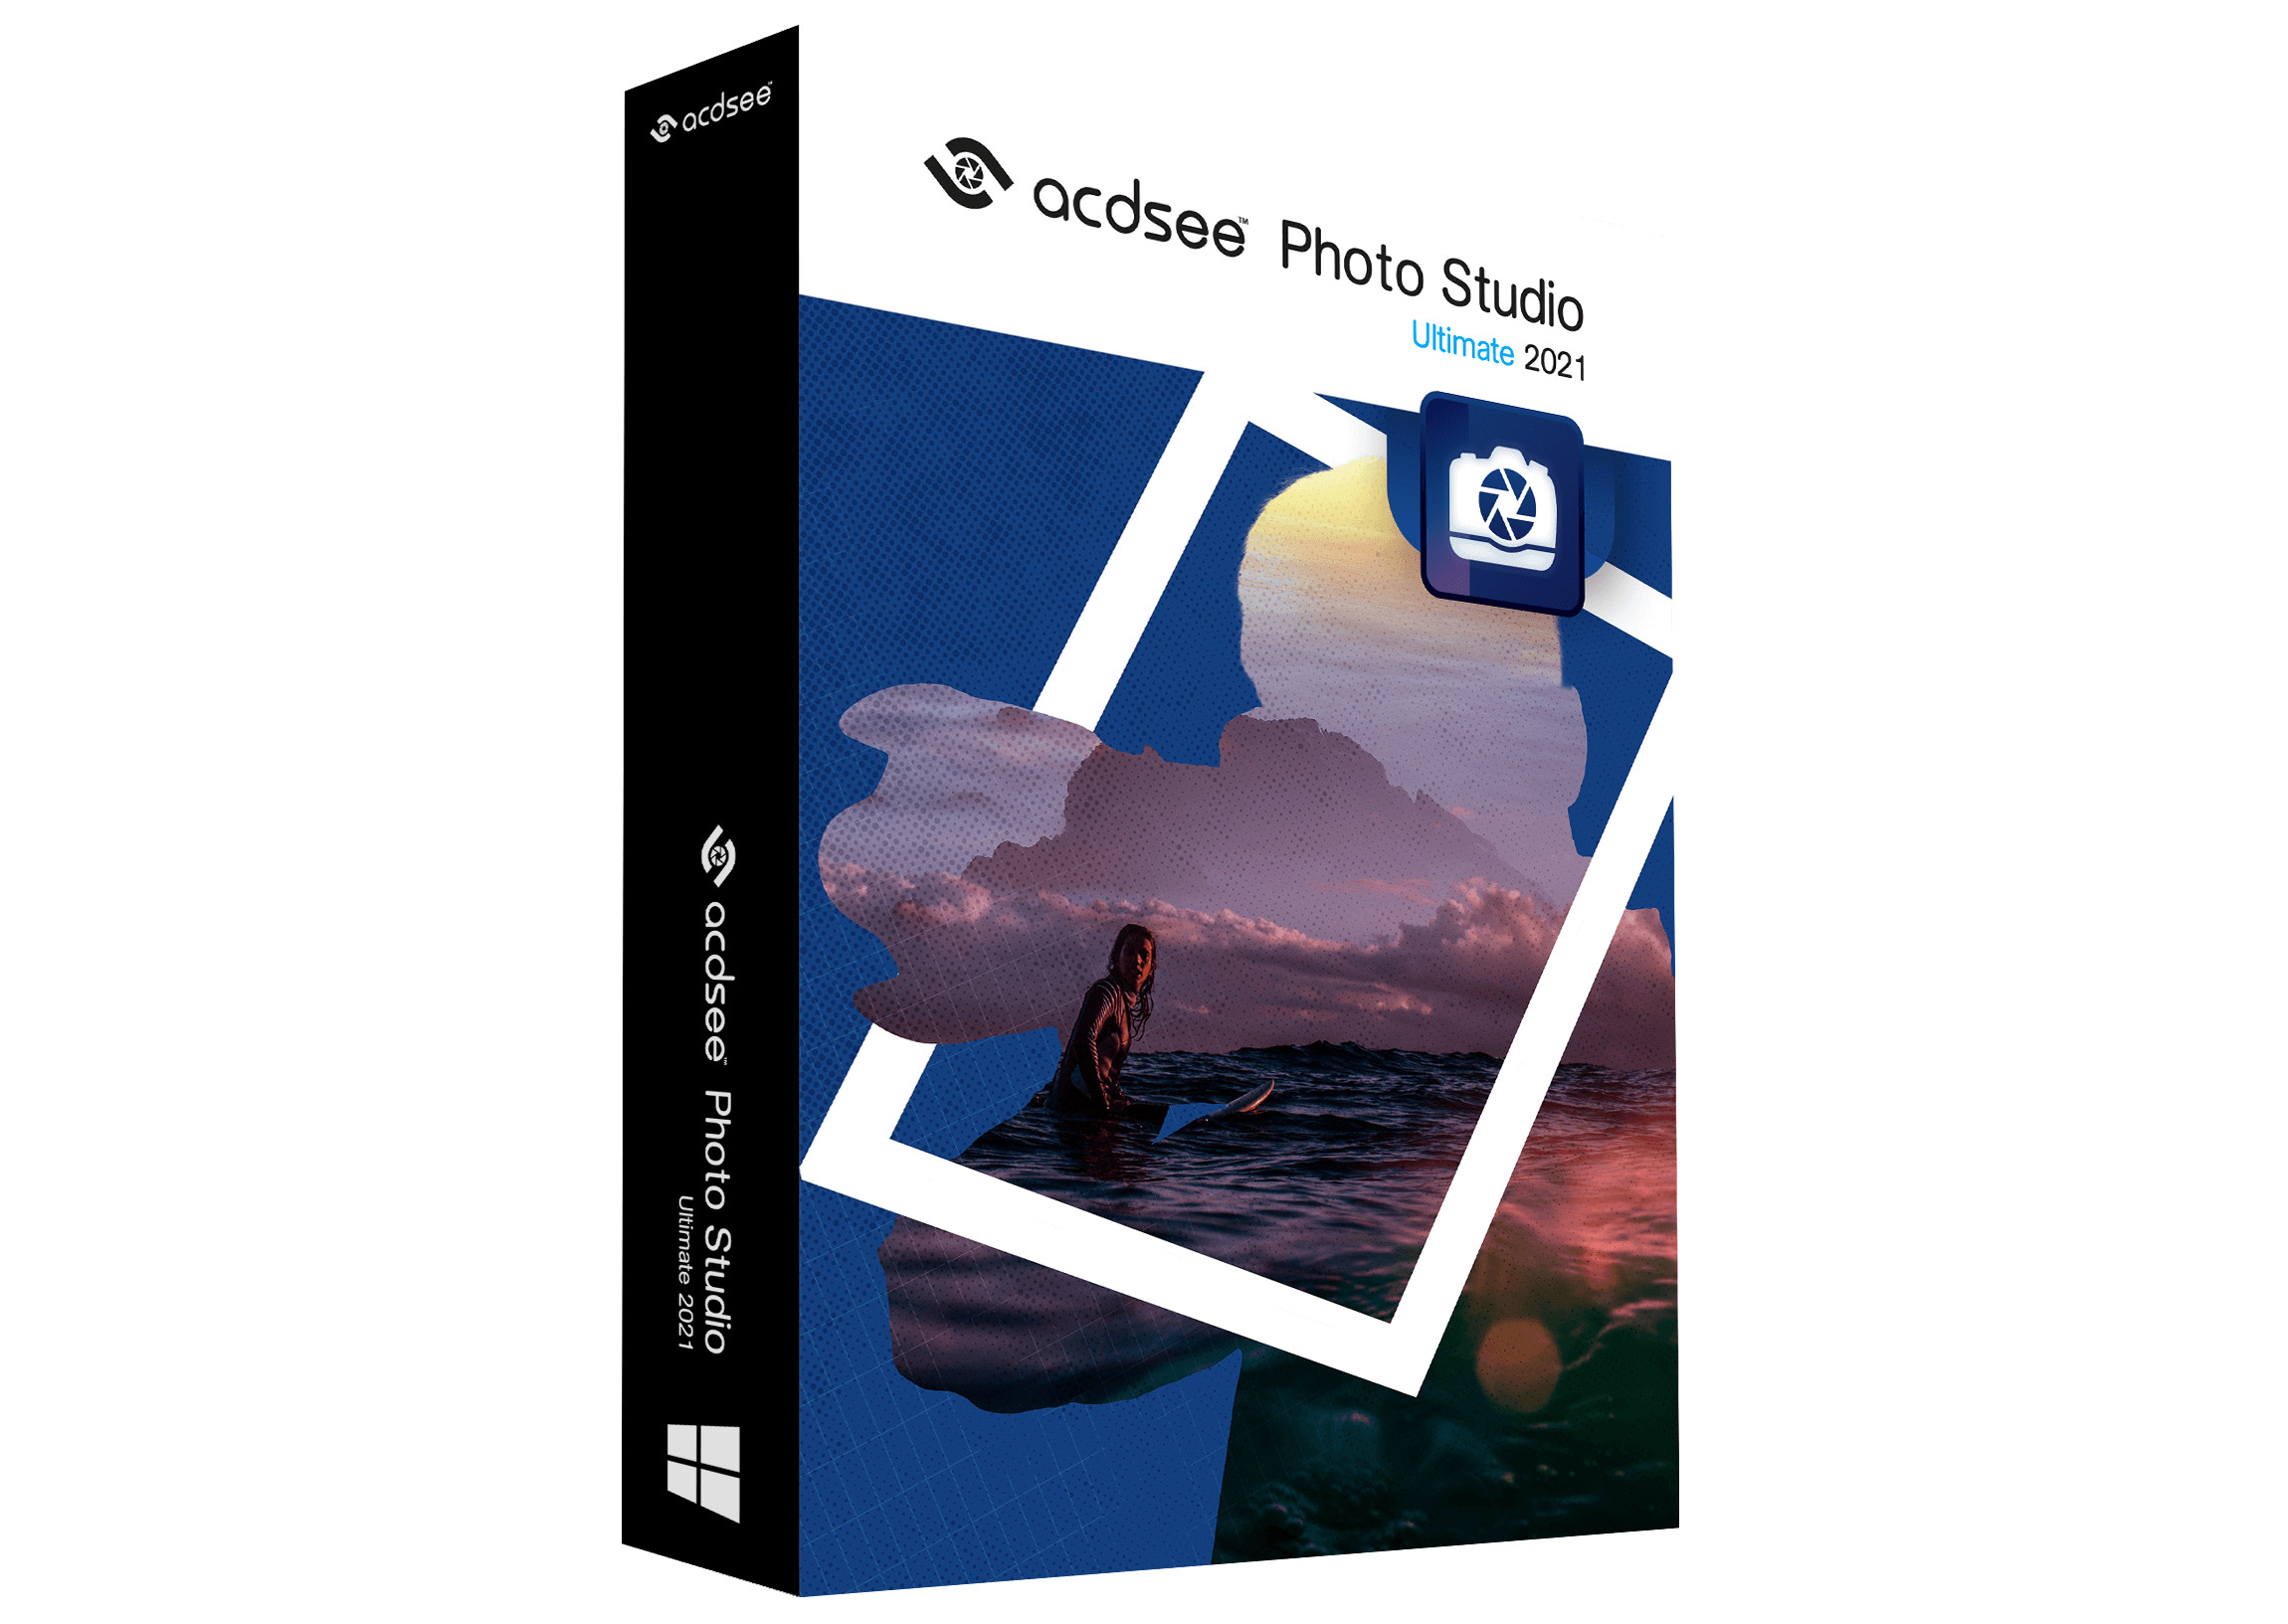 ACDSee Photo Studio Ultimate 2021 Key (6 Months / 1 PC) 11.29 usd